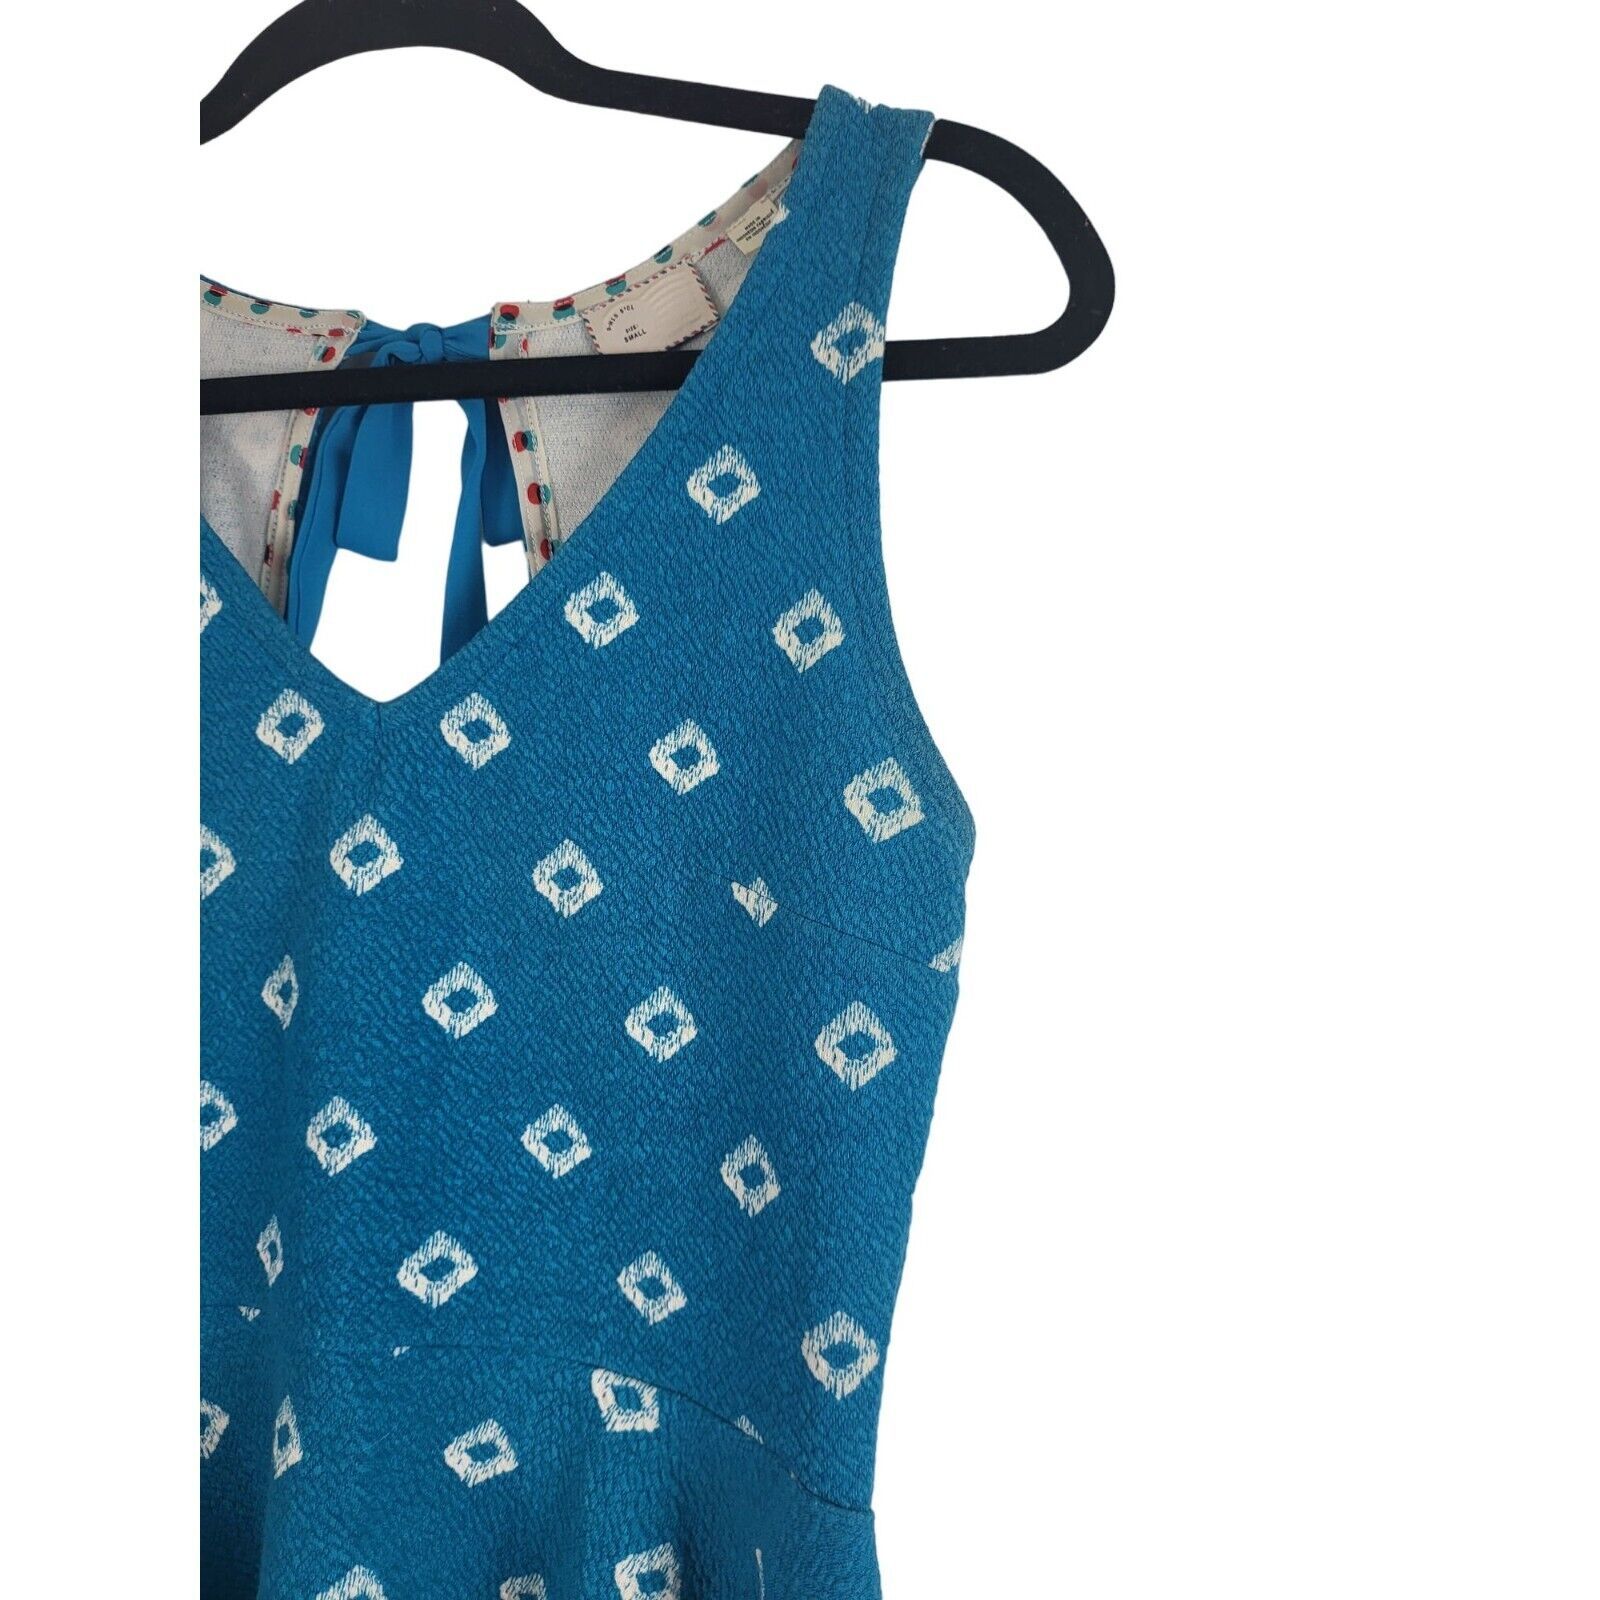 Primary image for Anthropologie Postemate Top S Womens Blue White v Neck Sleeveless Tie Back